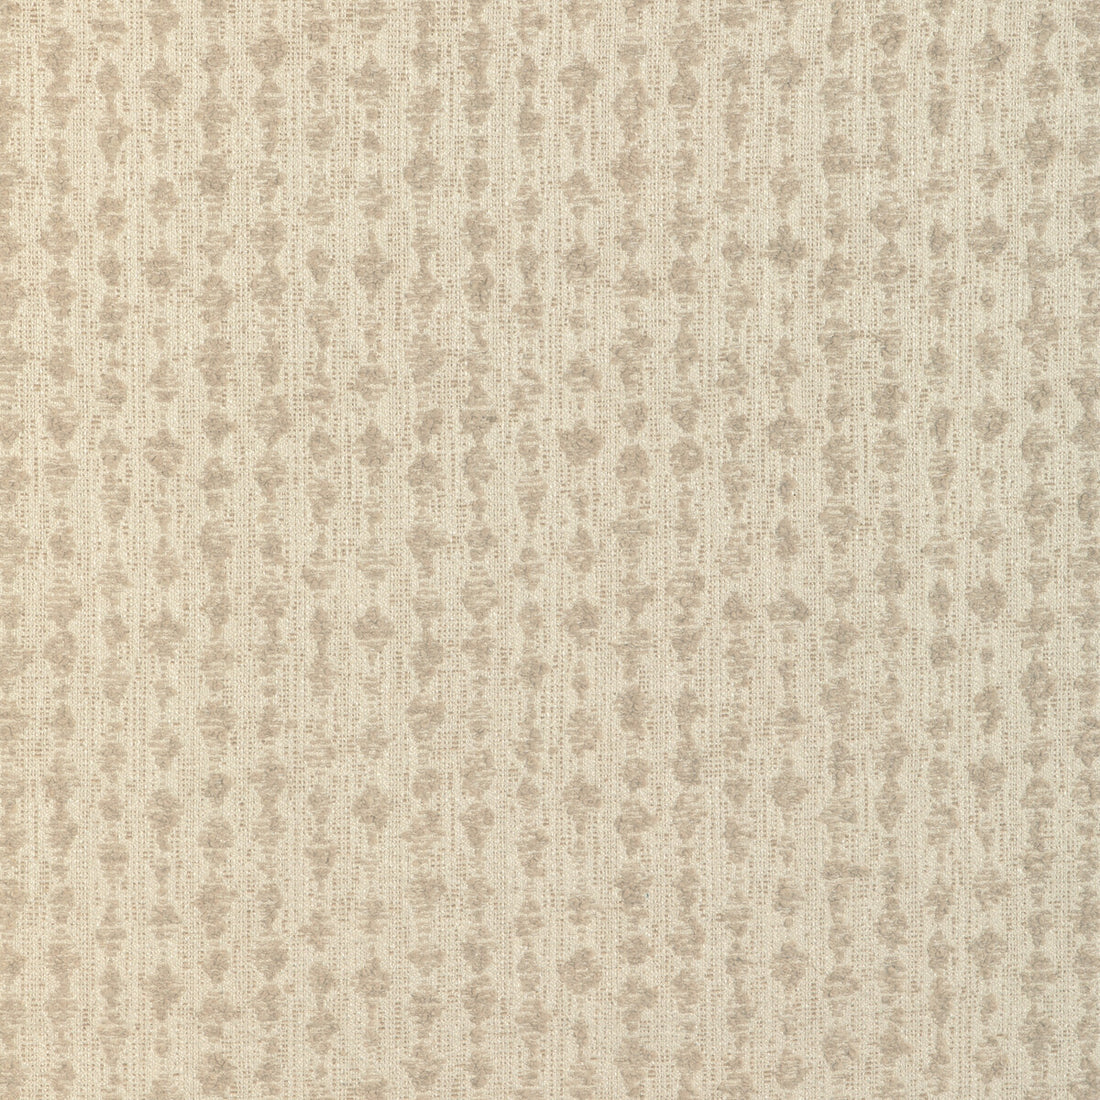 Serai fabric in alabaster color - pattern GWF-3795.16.0 - by Lee Jofa Modern in the Kelly Wearstler VIII collection